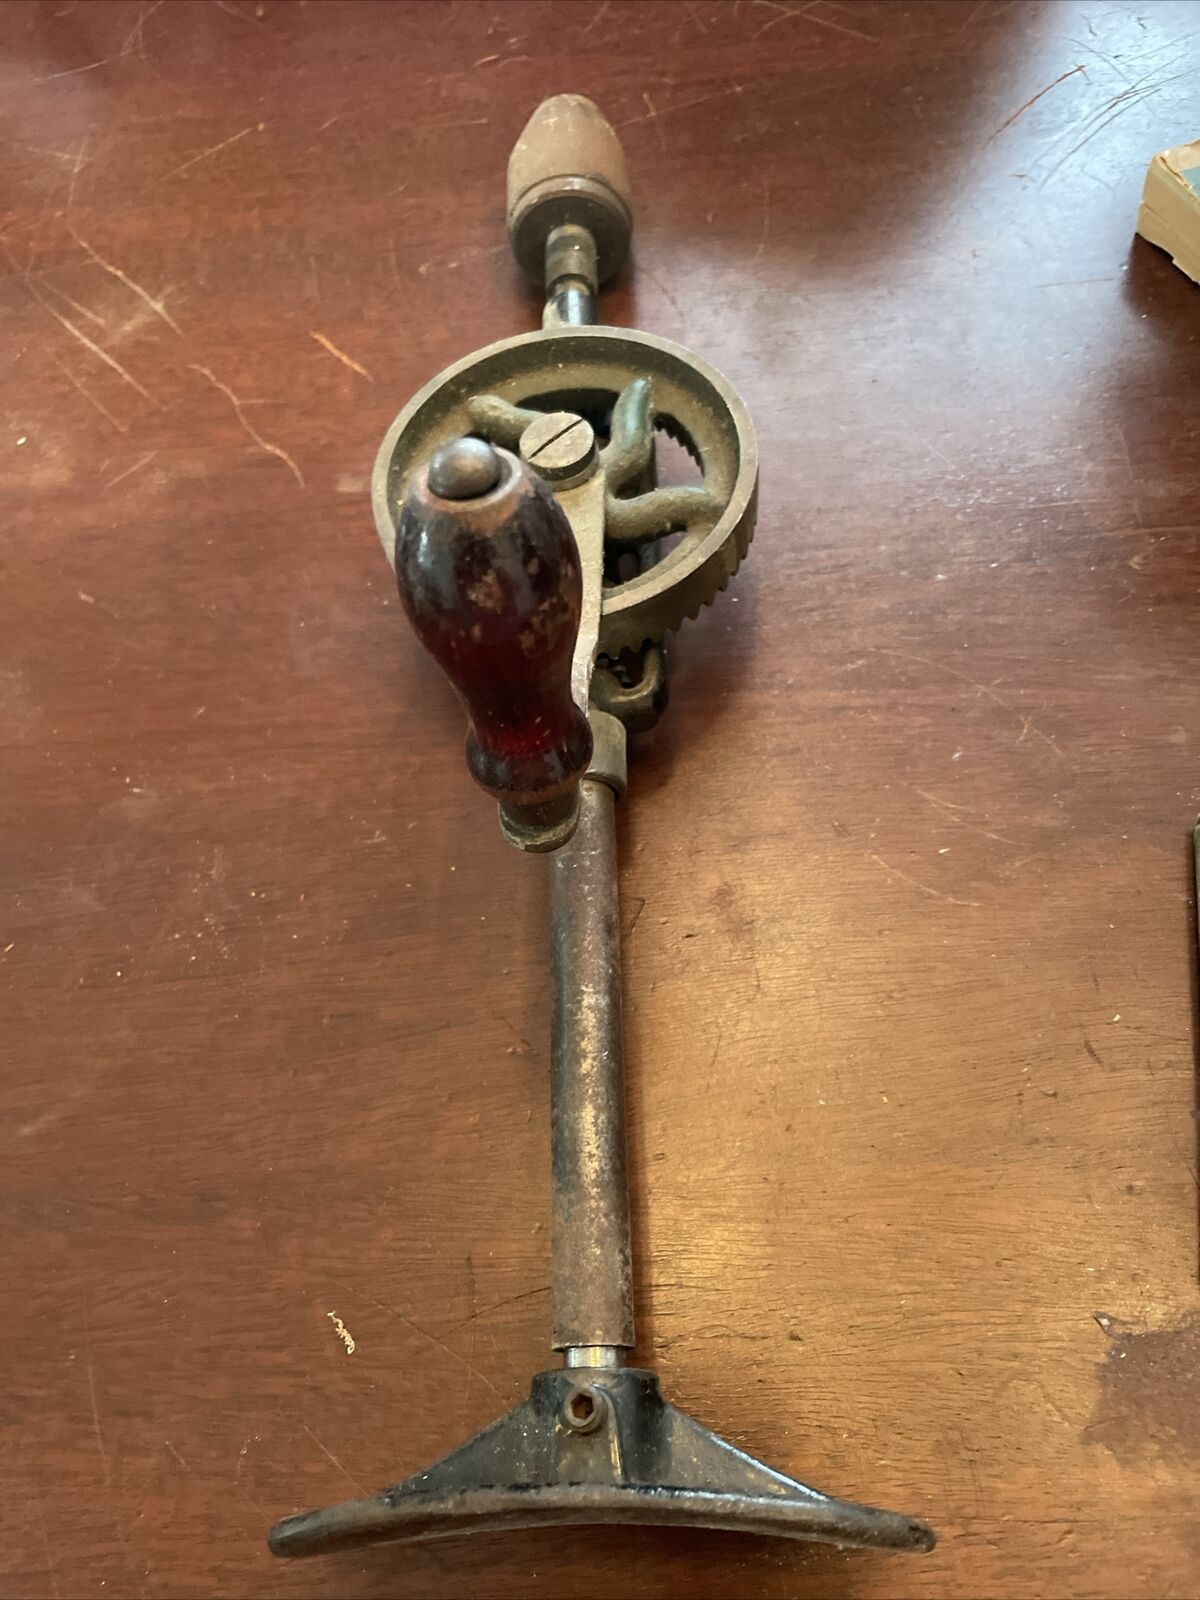 UNMARKED BRASS HAND DRILL-ANTIQUE TOOL